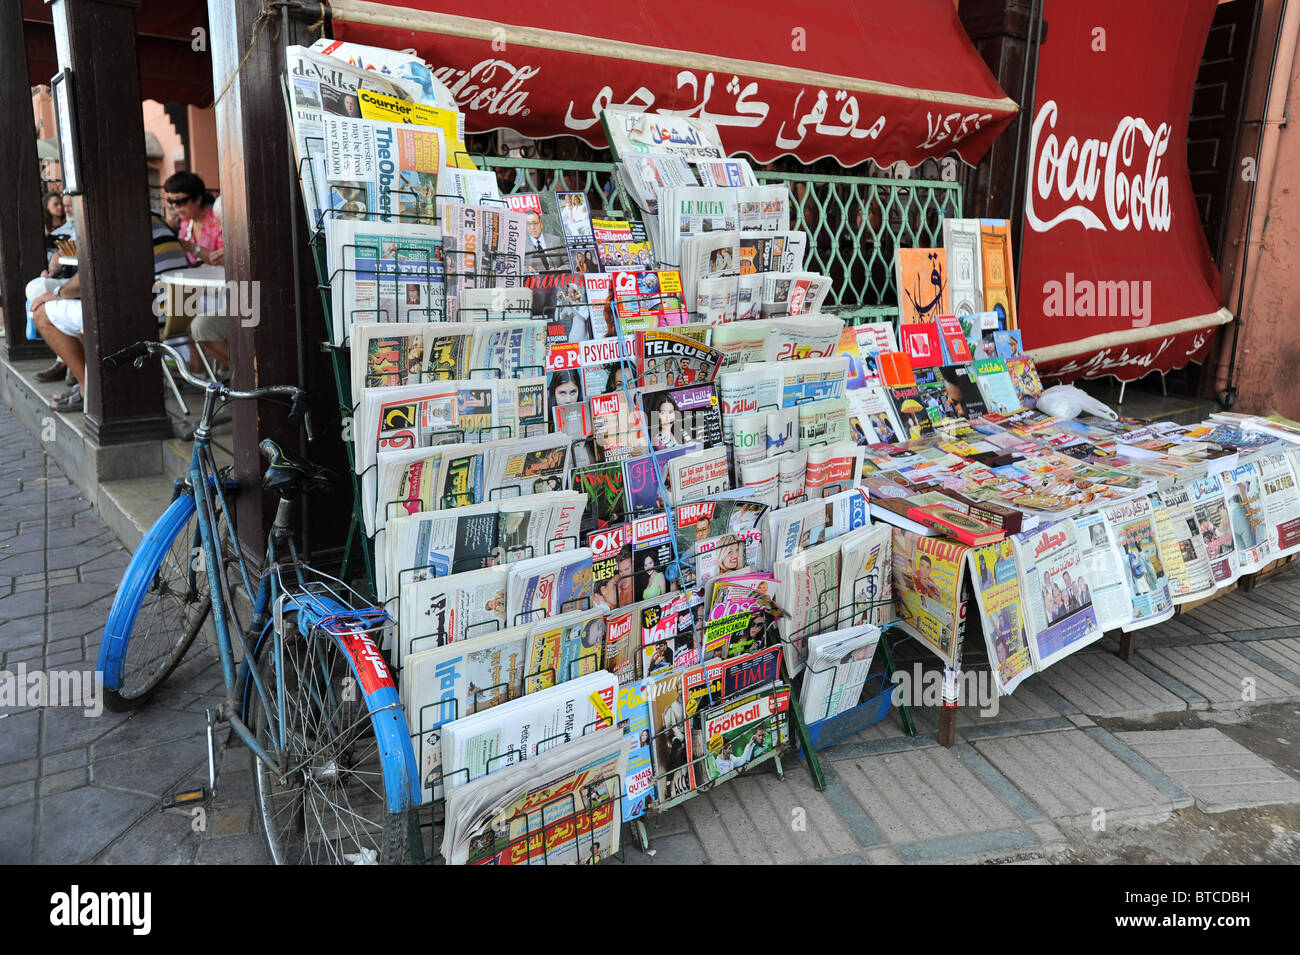 Newspaper and magazine stand in Djemaa El Fna, Marrakech, Morocco, North Africa Stock Photo